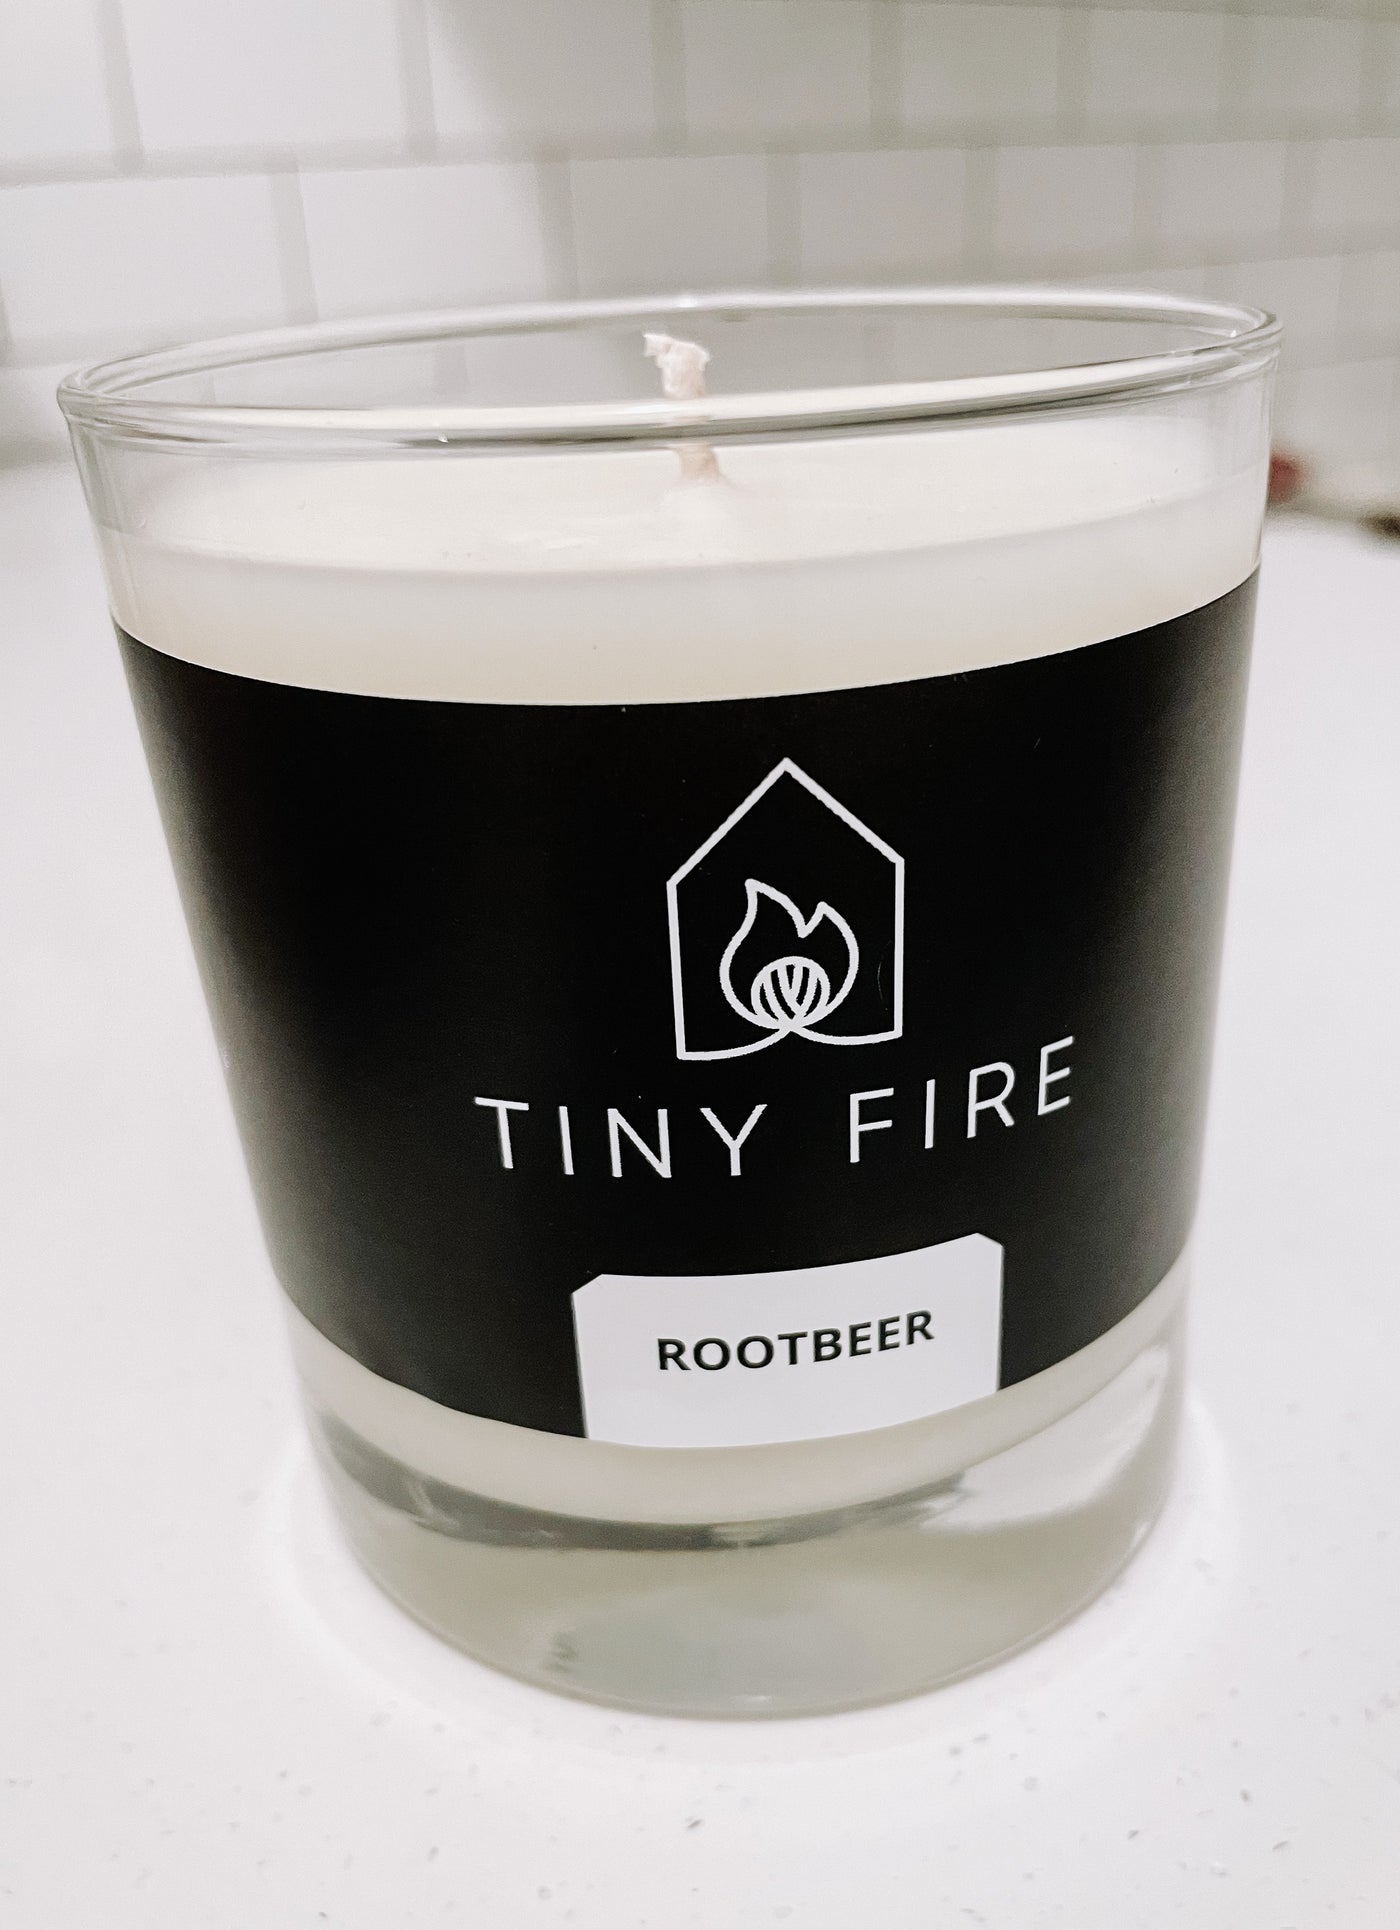 The Rootbeer Candle